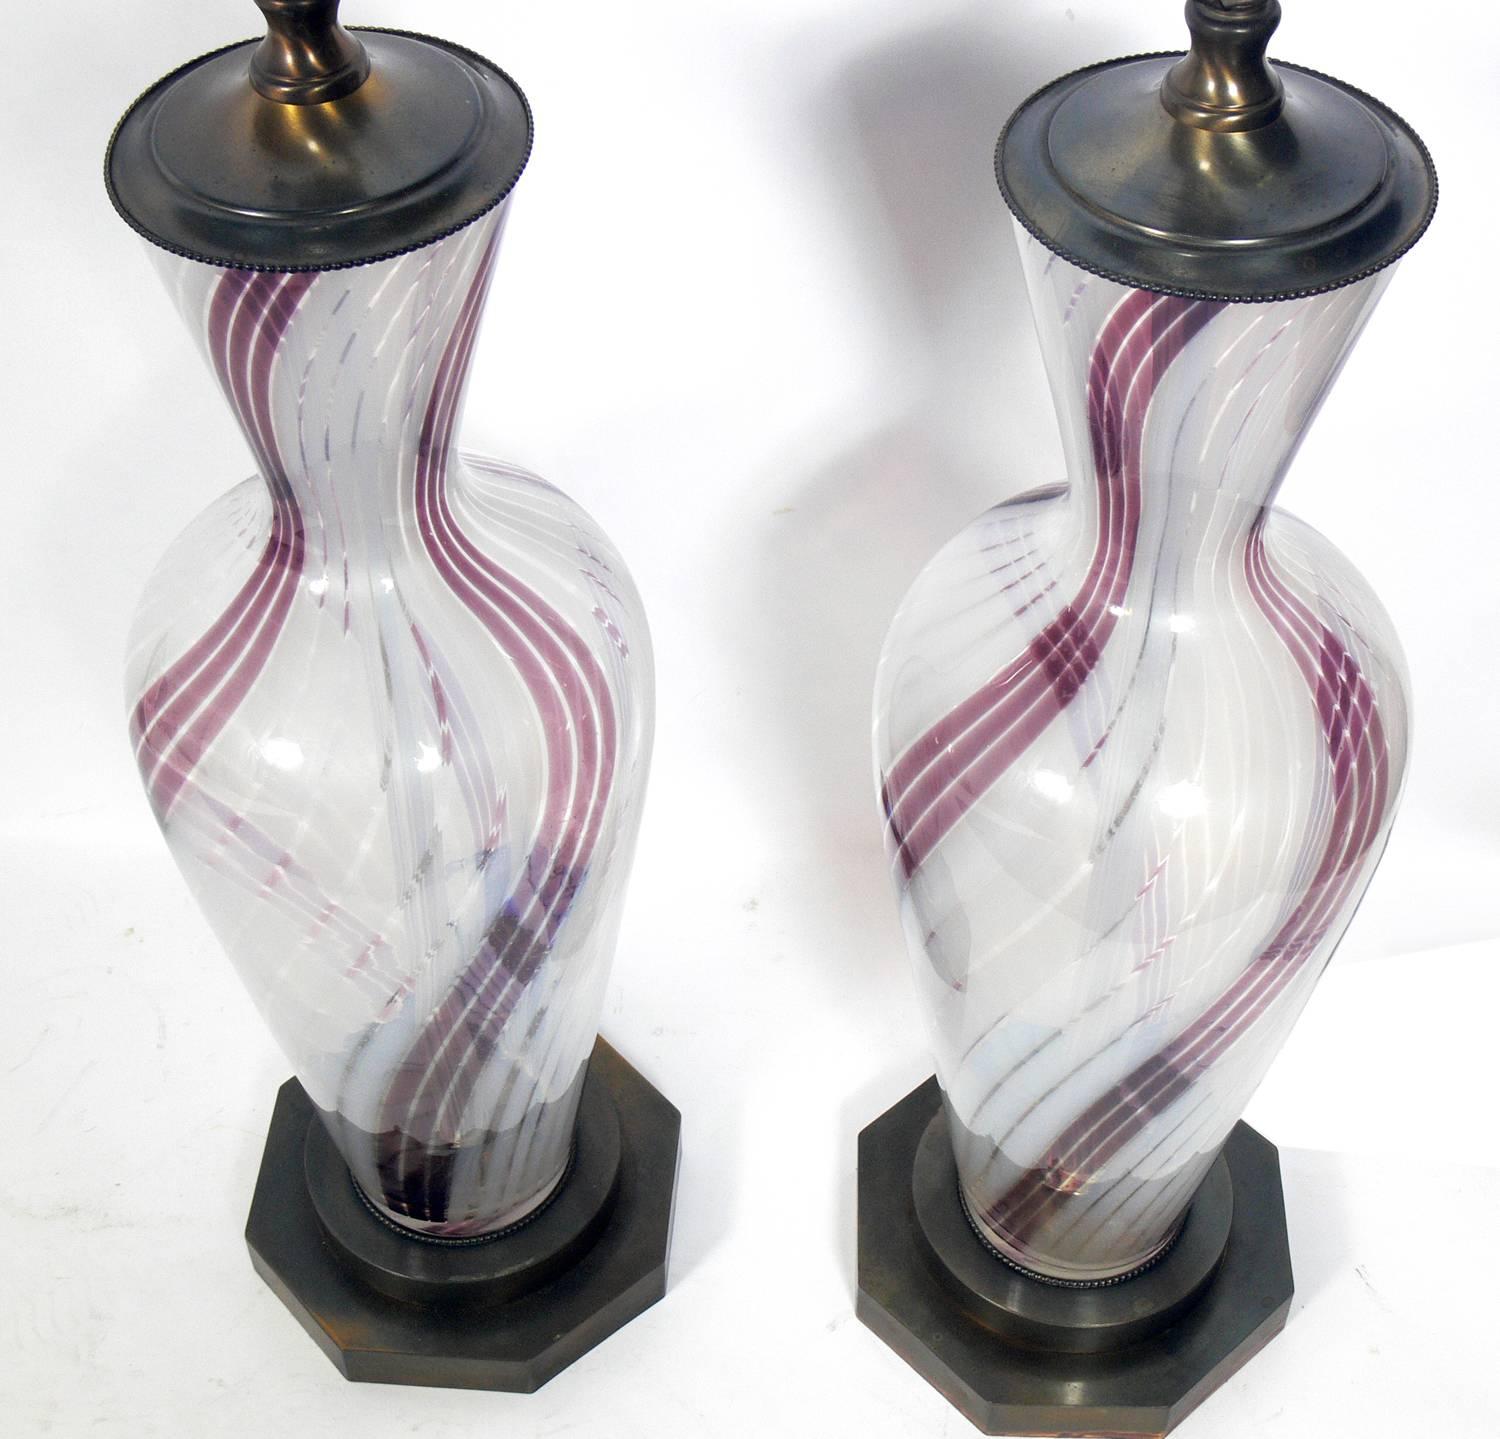 Pair of large-scale Murano glass lamps, Italian, circa 1950s. They have been rewired and are ready to use, The price noted below includes the shades.